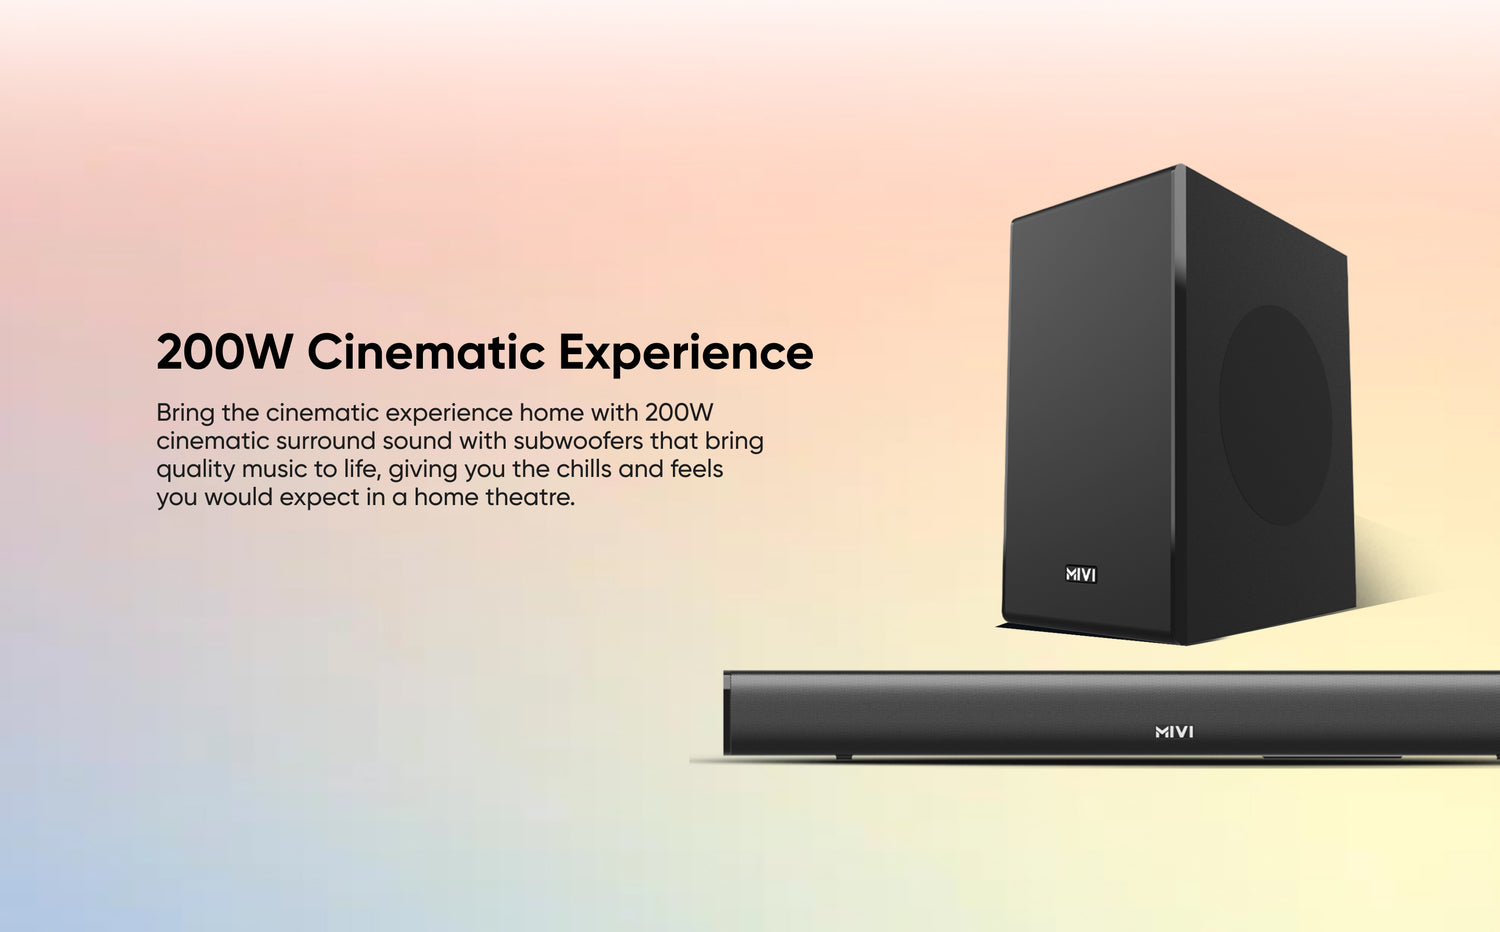 200W Cinematic Experience - Bring the cinematic experience home with 200W cinematic surround sound with subwoofers that bring quality music to life, giving you the chills and feels you would expect in a home theatre.